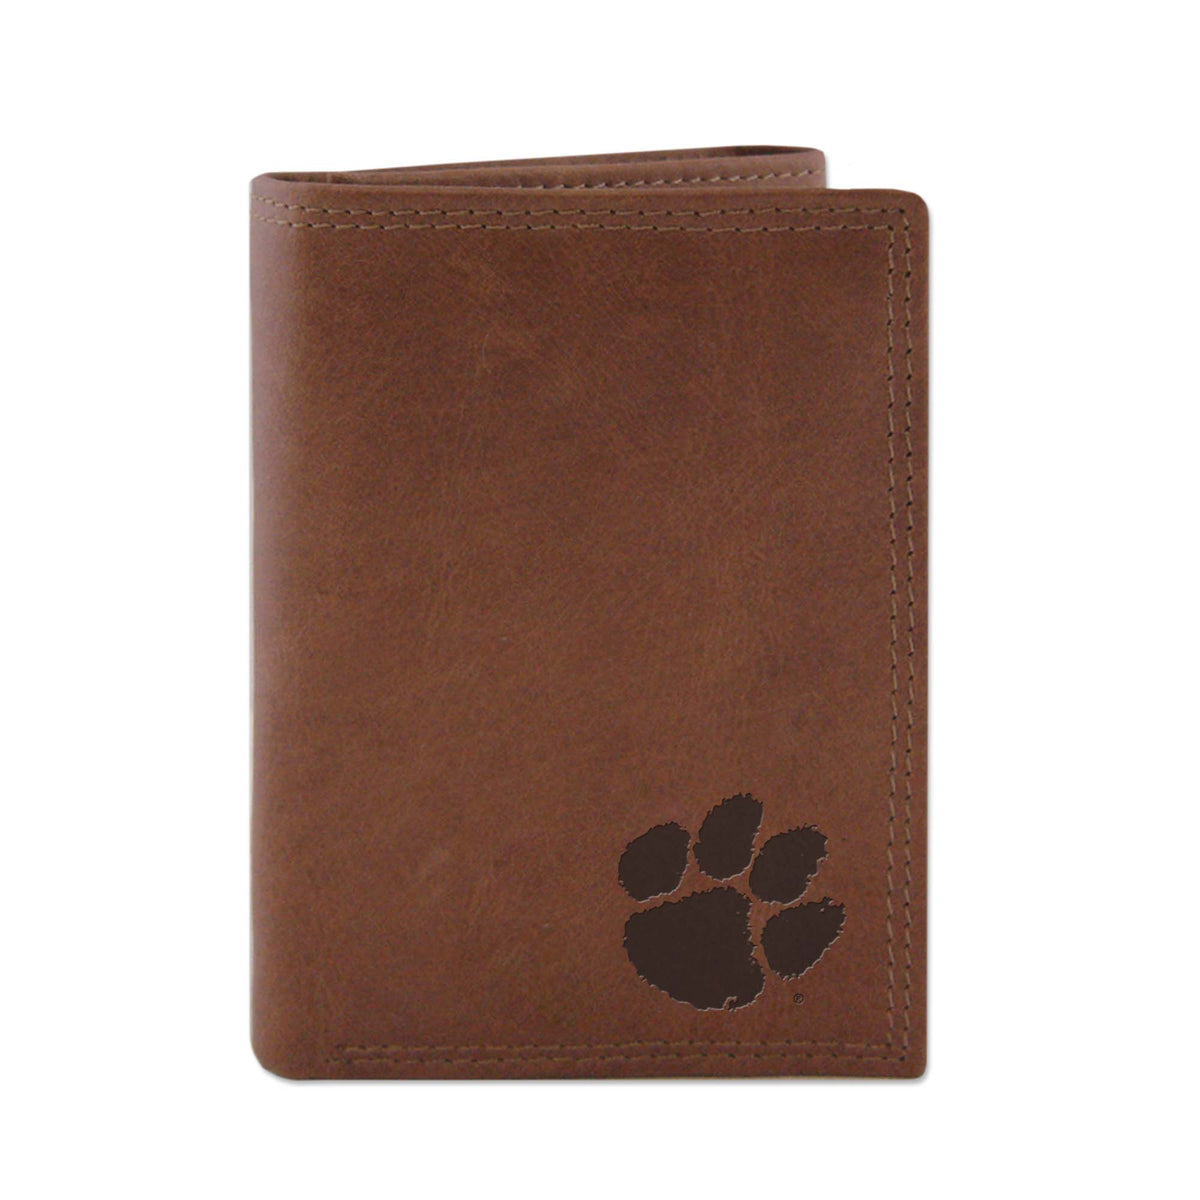 Clemson Embossed Leather Trifold